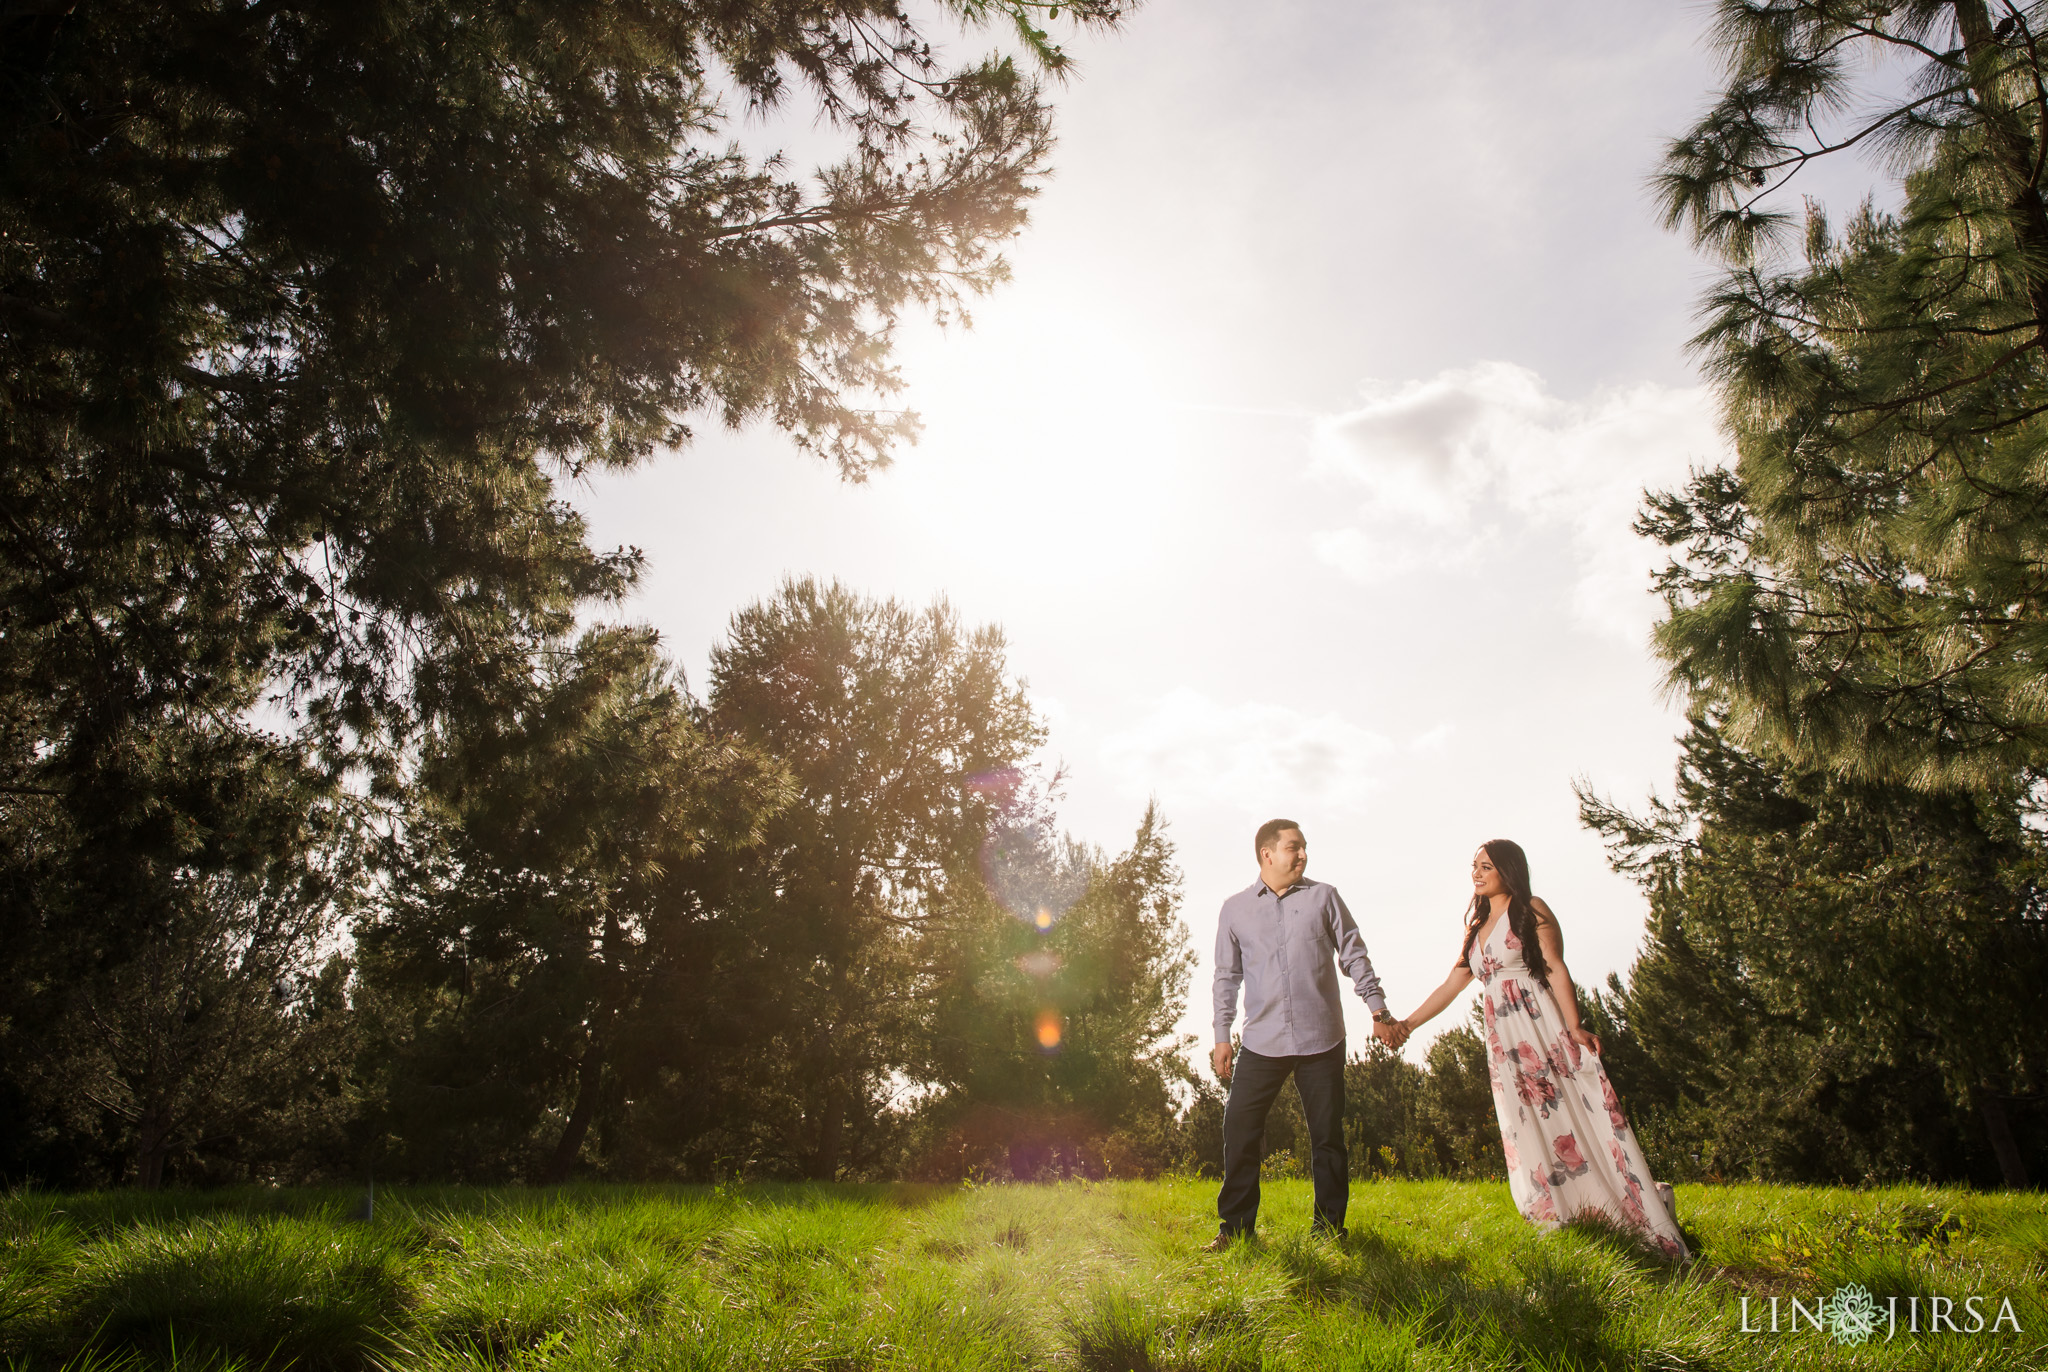 02 Jeffrey Open Space Trail Orange County Engagement Photography